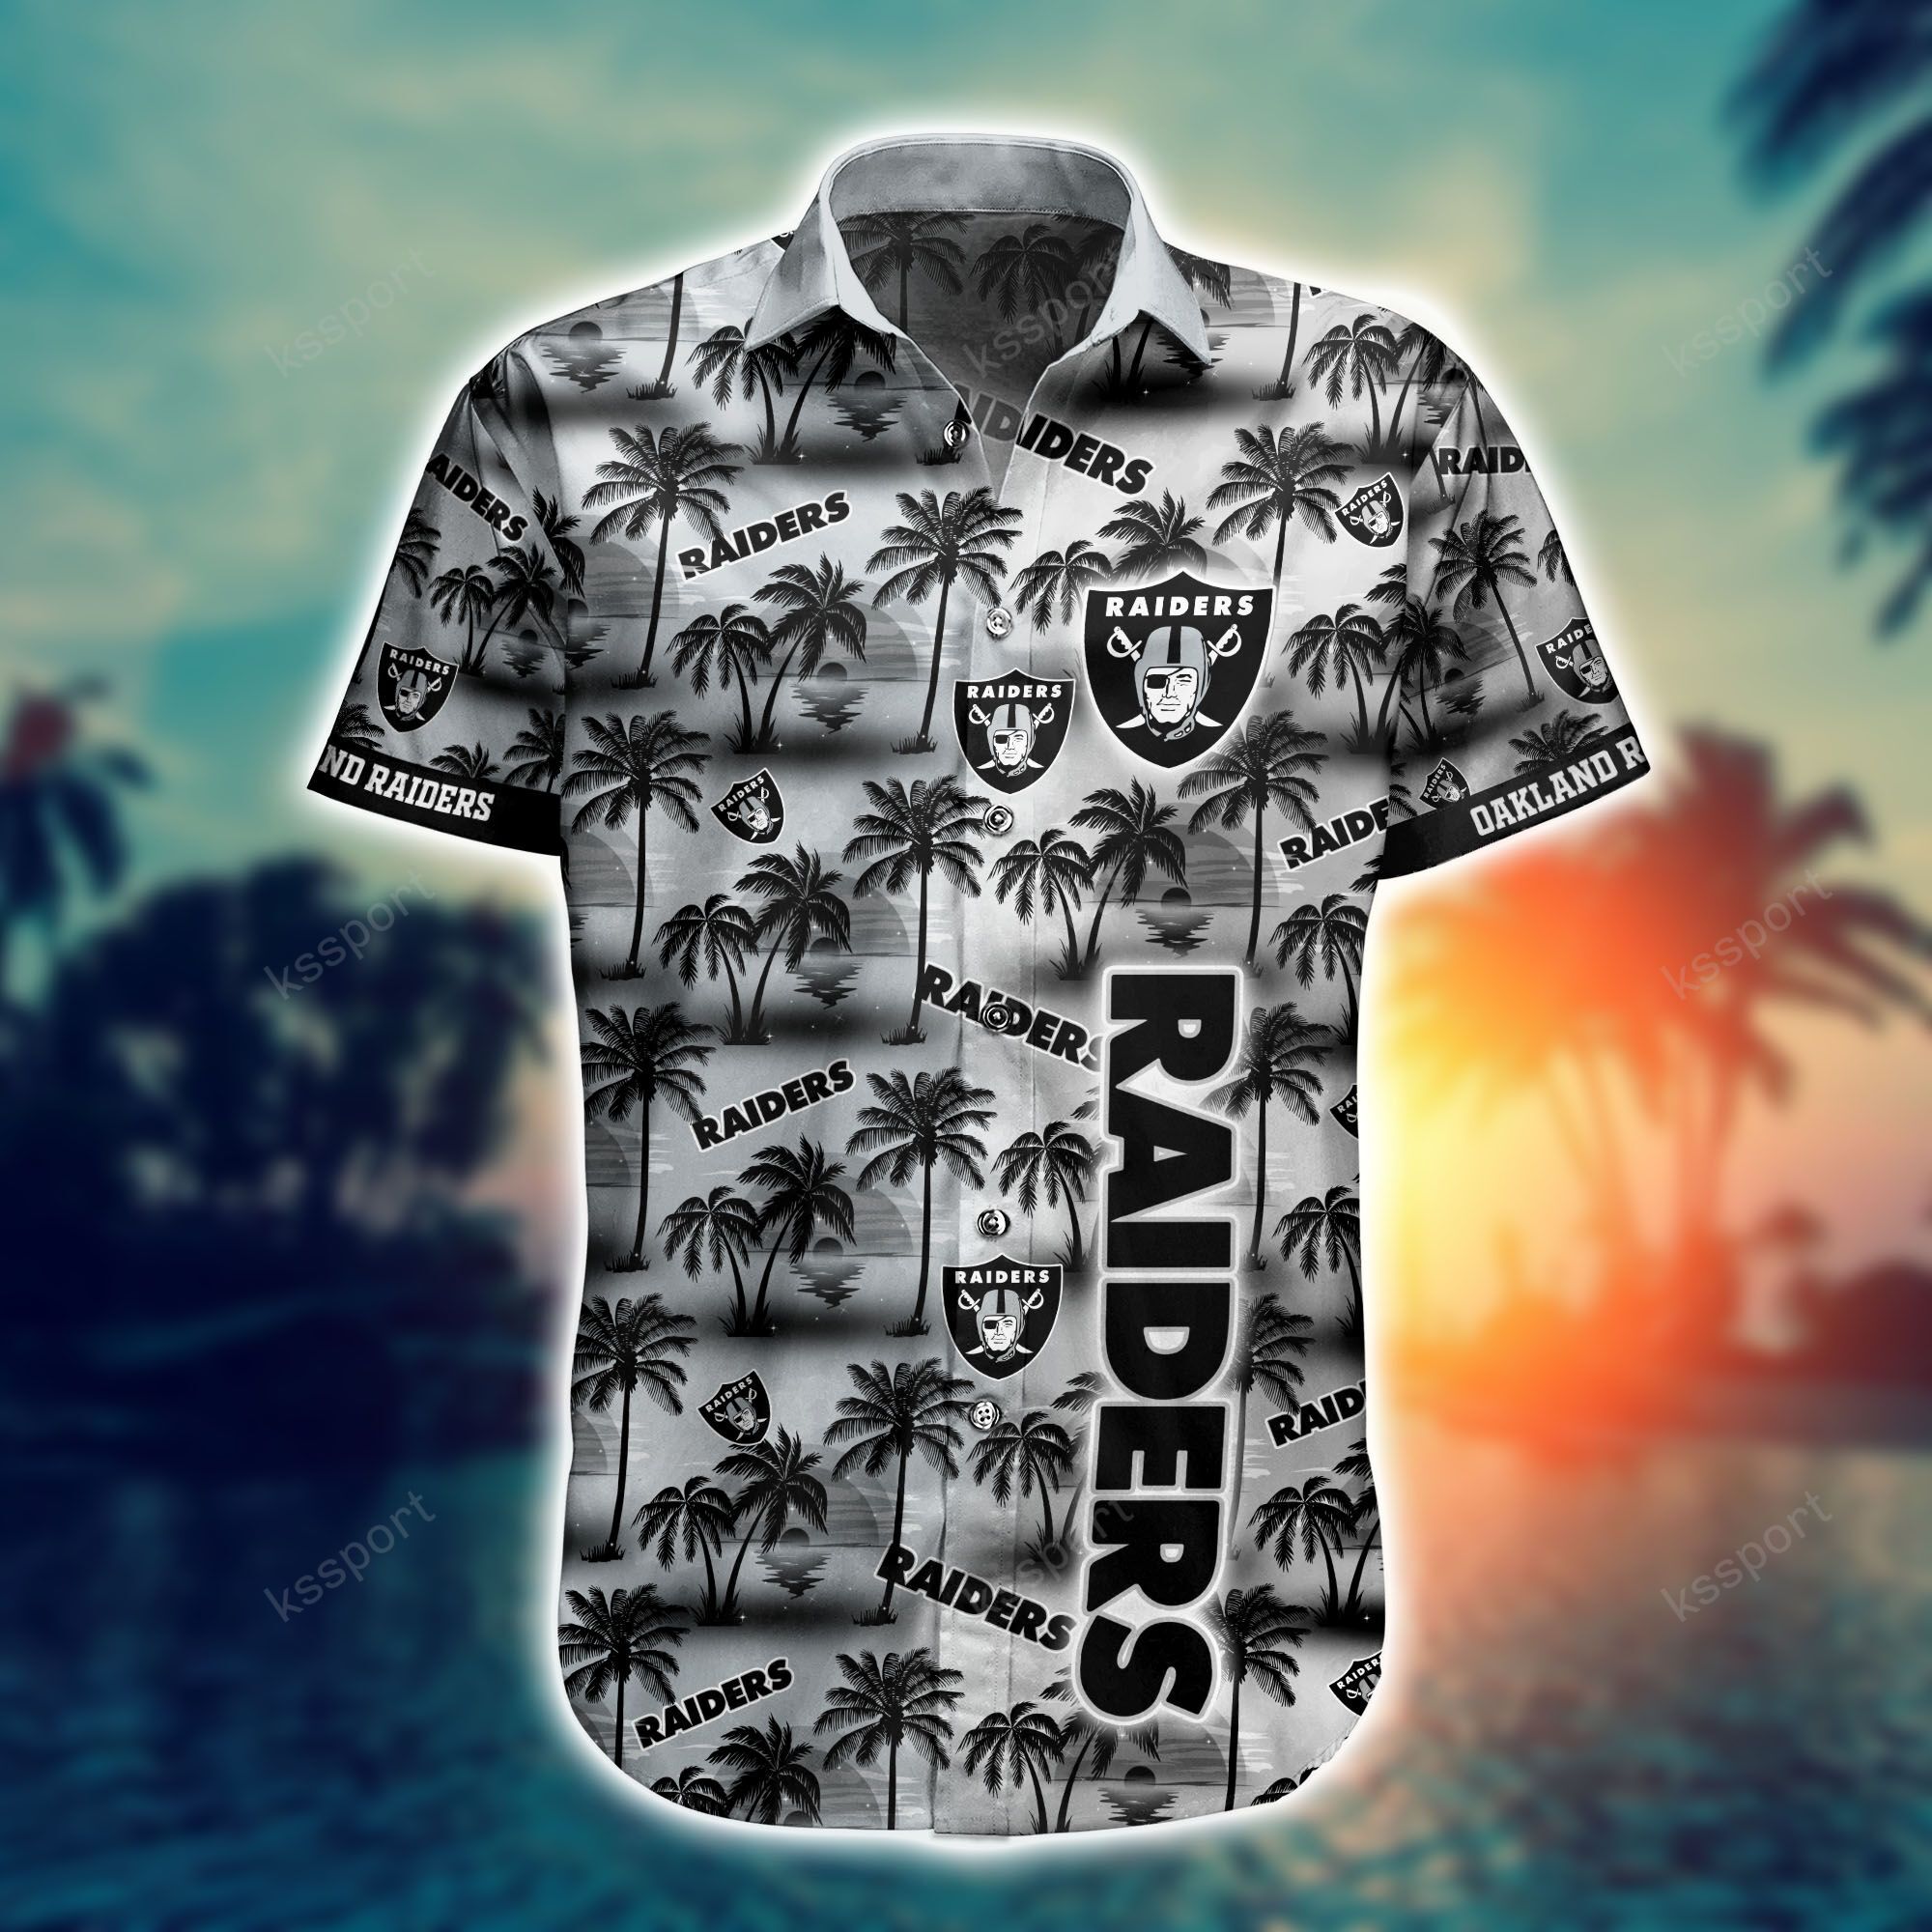 Top cool Hawaiian shirt 2022 - Make sure you get yours today before they run out! 193